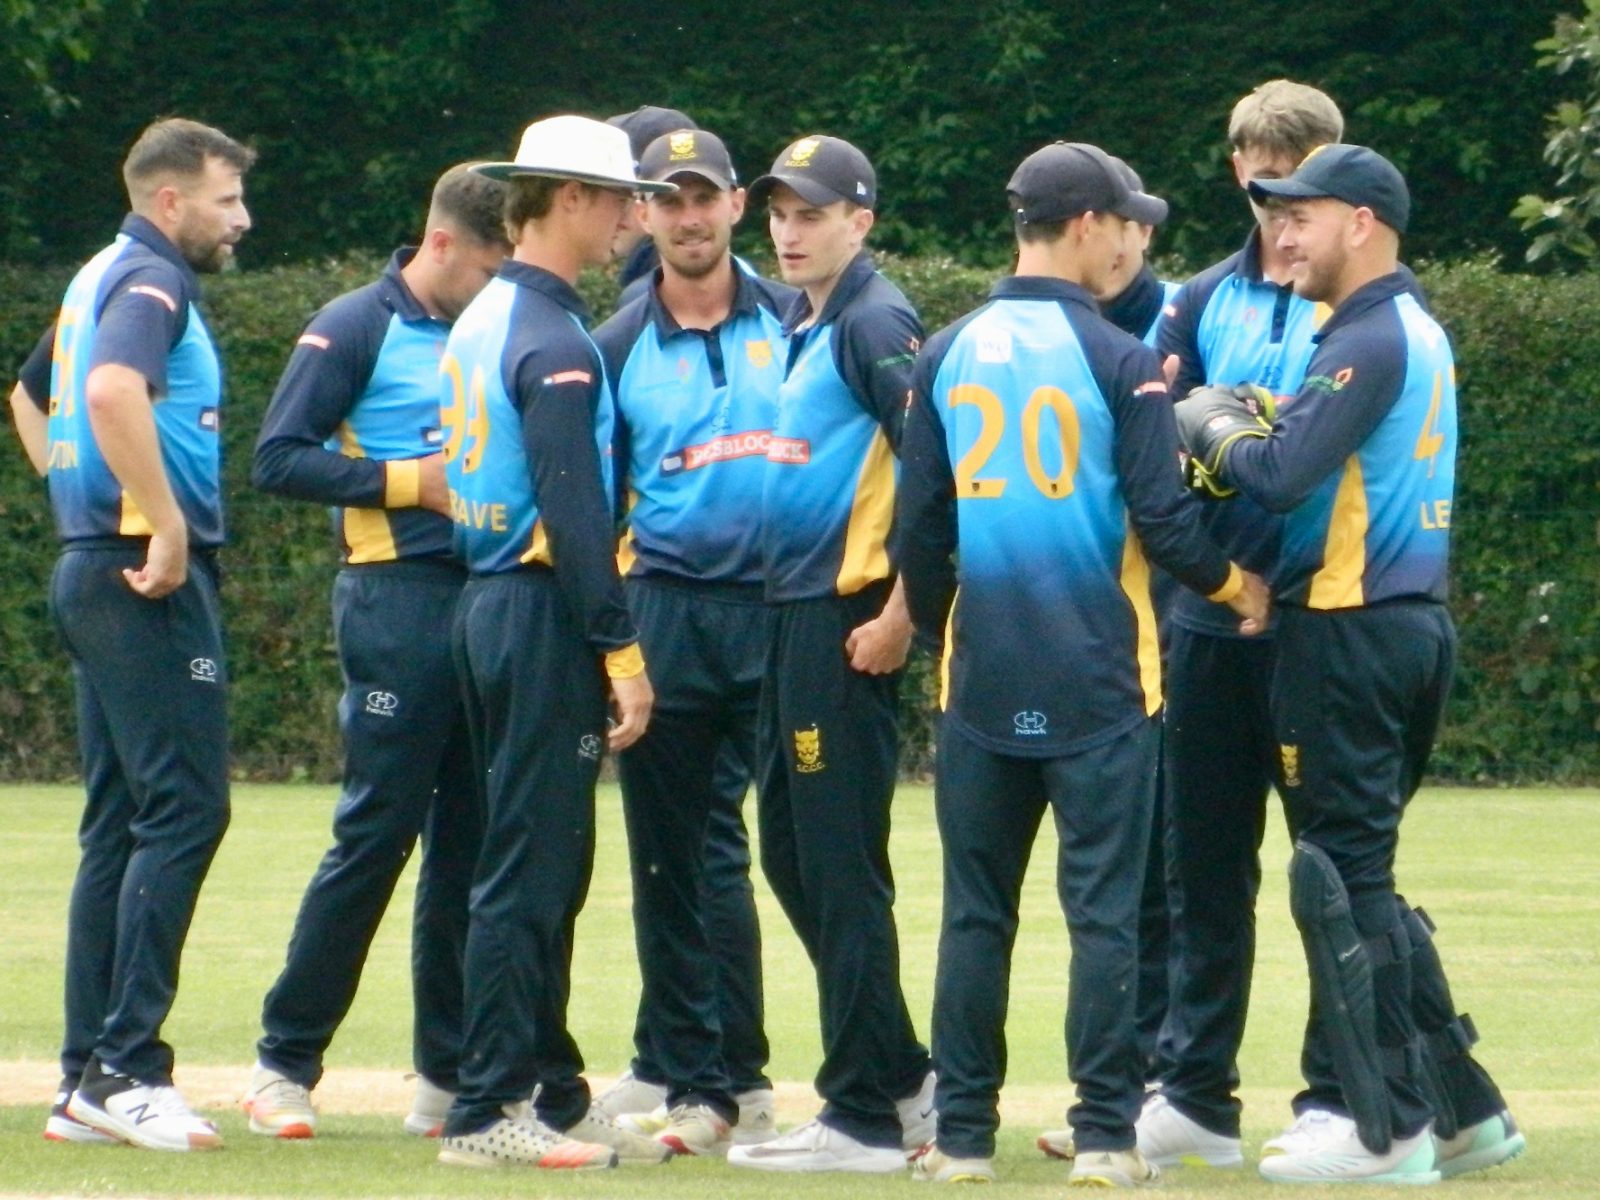 Shropshire-celebrate-a-wicket-against-Cambridgeshire-in-the-NCCA-Trophy-match-scaled